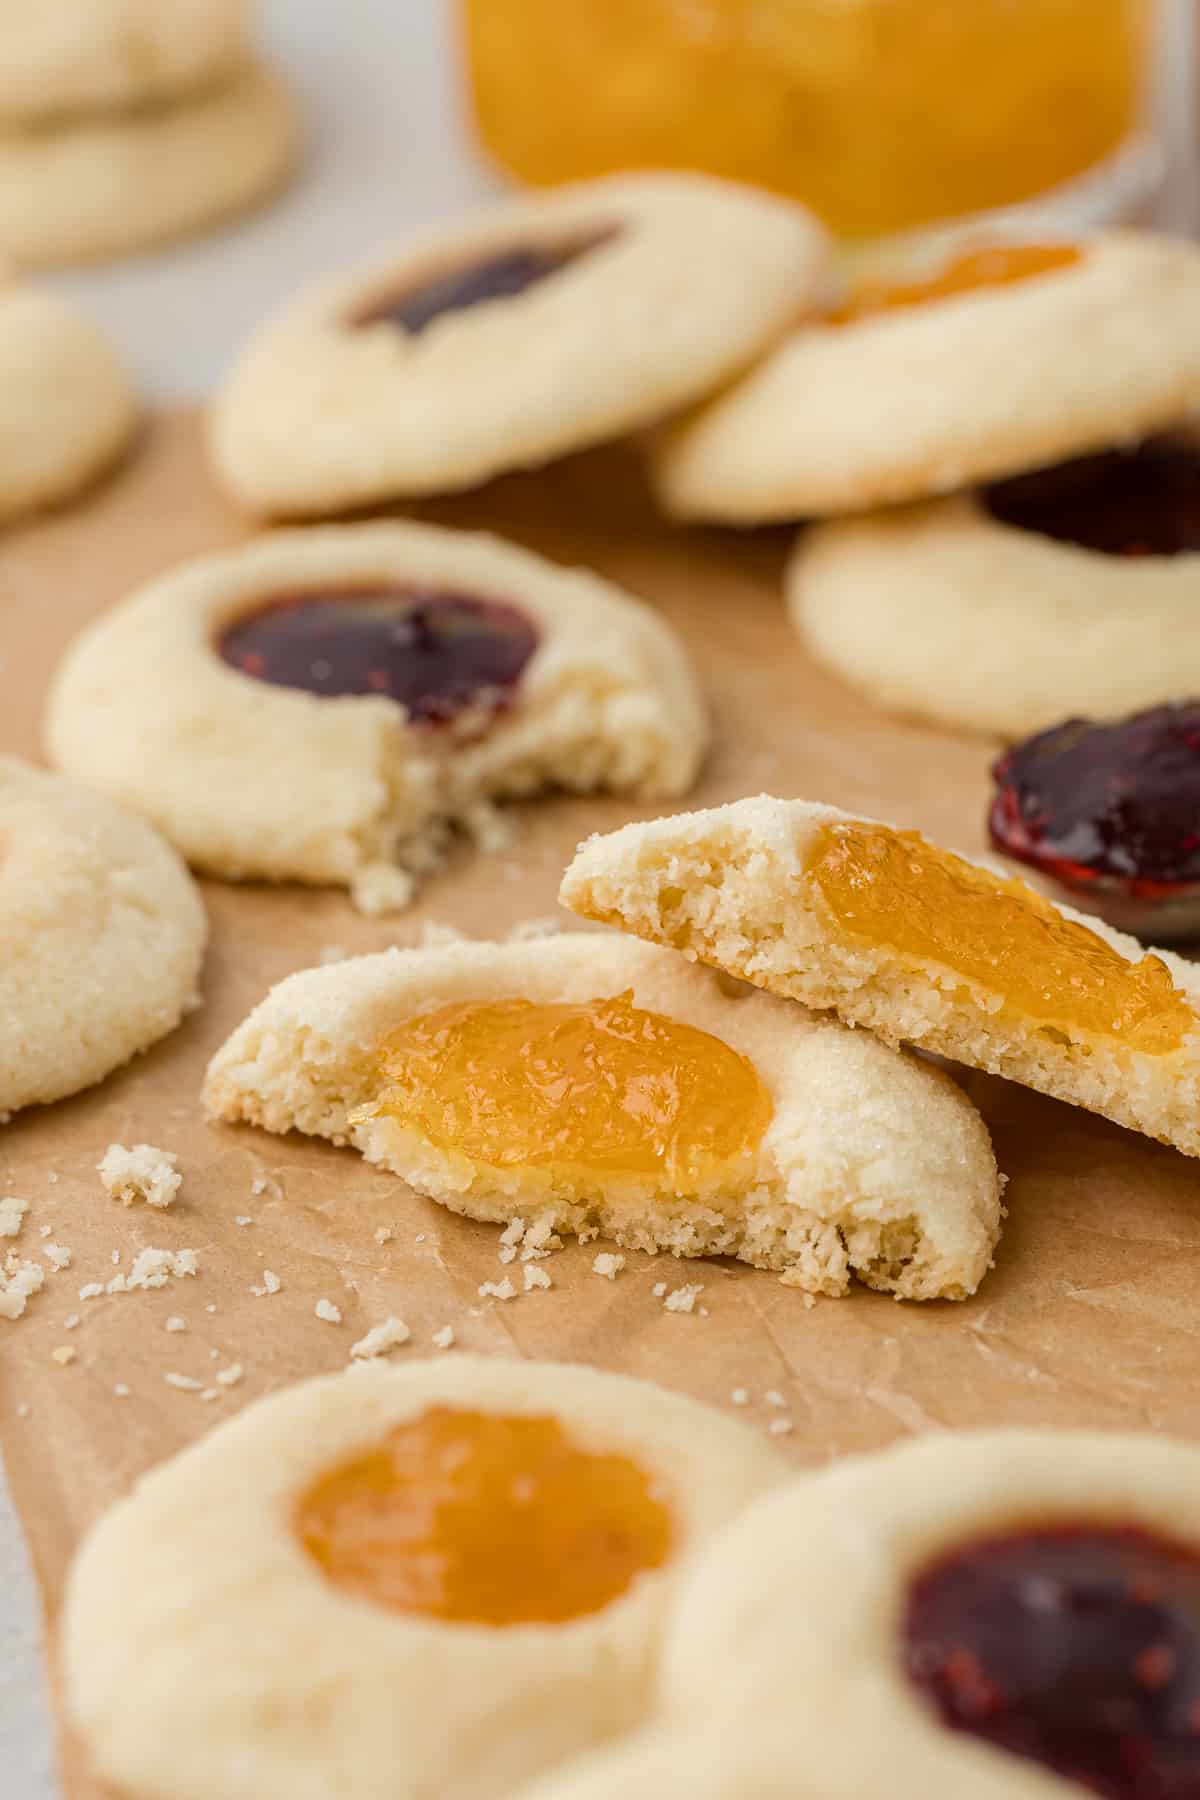 close up of thumbprint cookies on brown paper, some half eaten or broken in half with more whole cookies scattered around